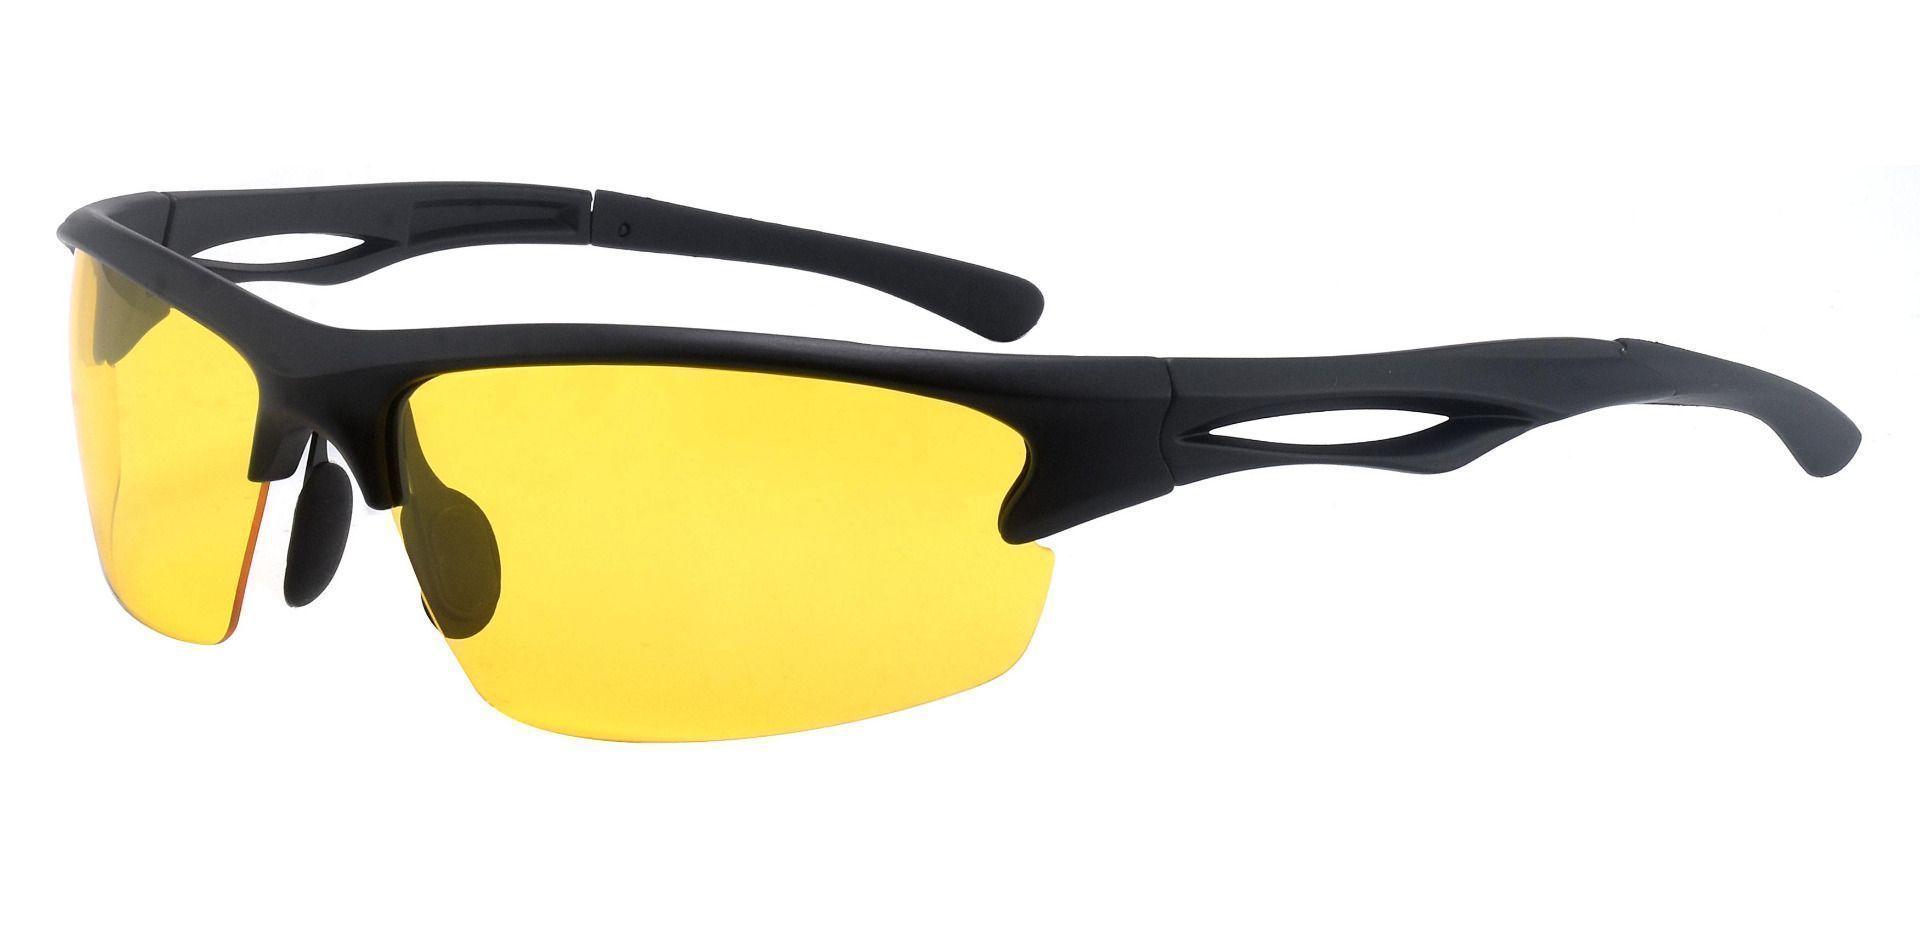 League Sports Glasses Non-Rx Sunglasses - Black Frame With Yellow Night Lenses